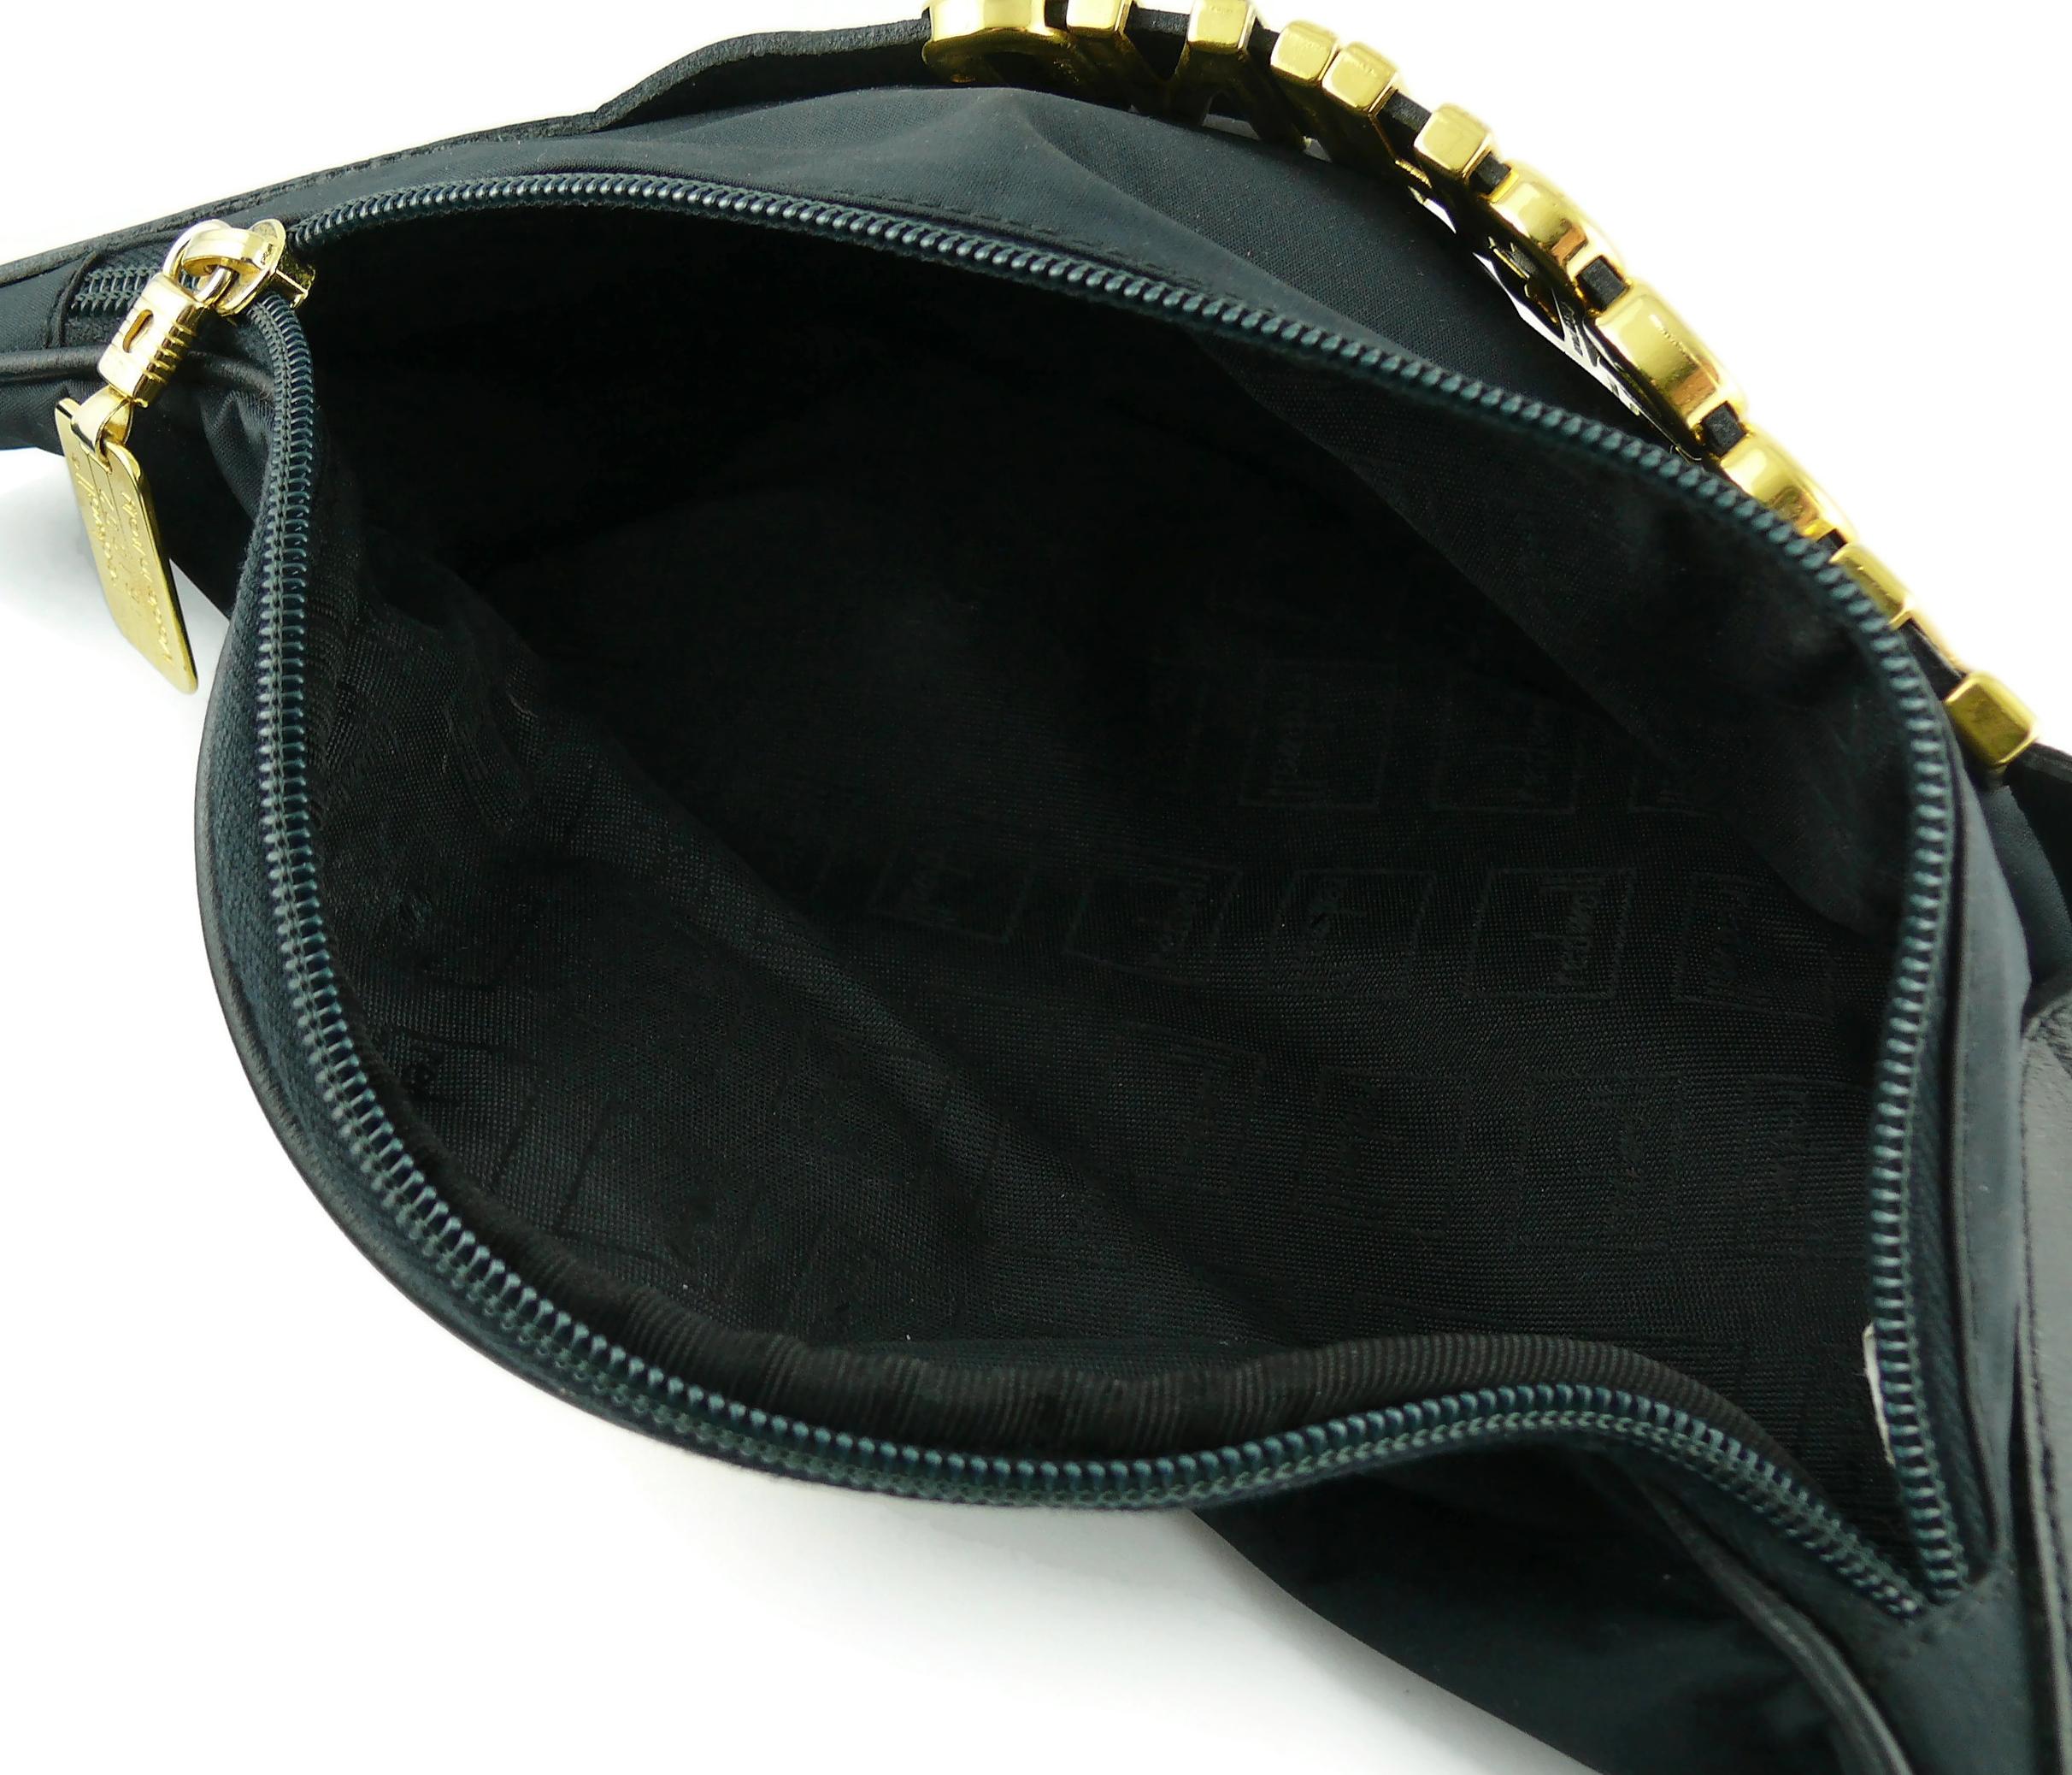 Women's or Men's Moschino by Redwall Vintage Black Fanny Pack